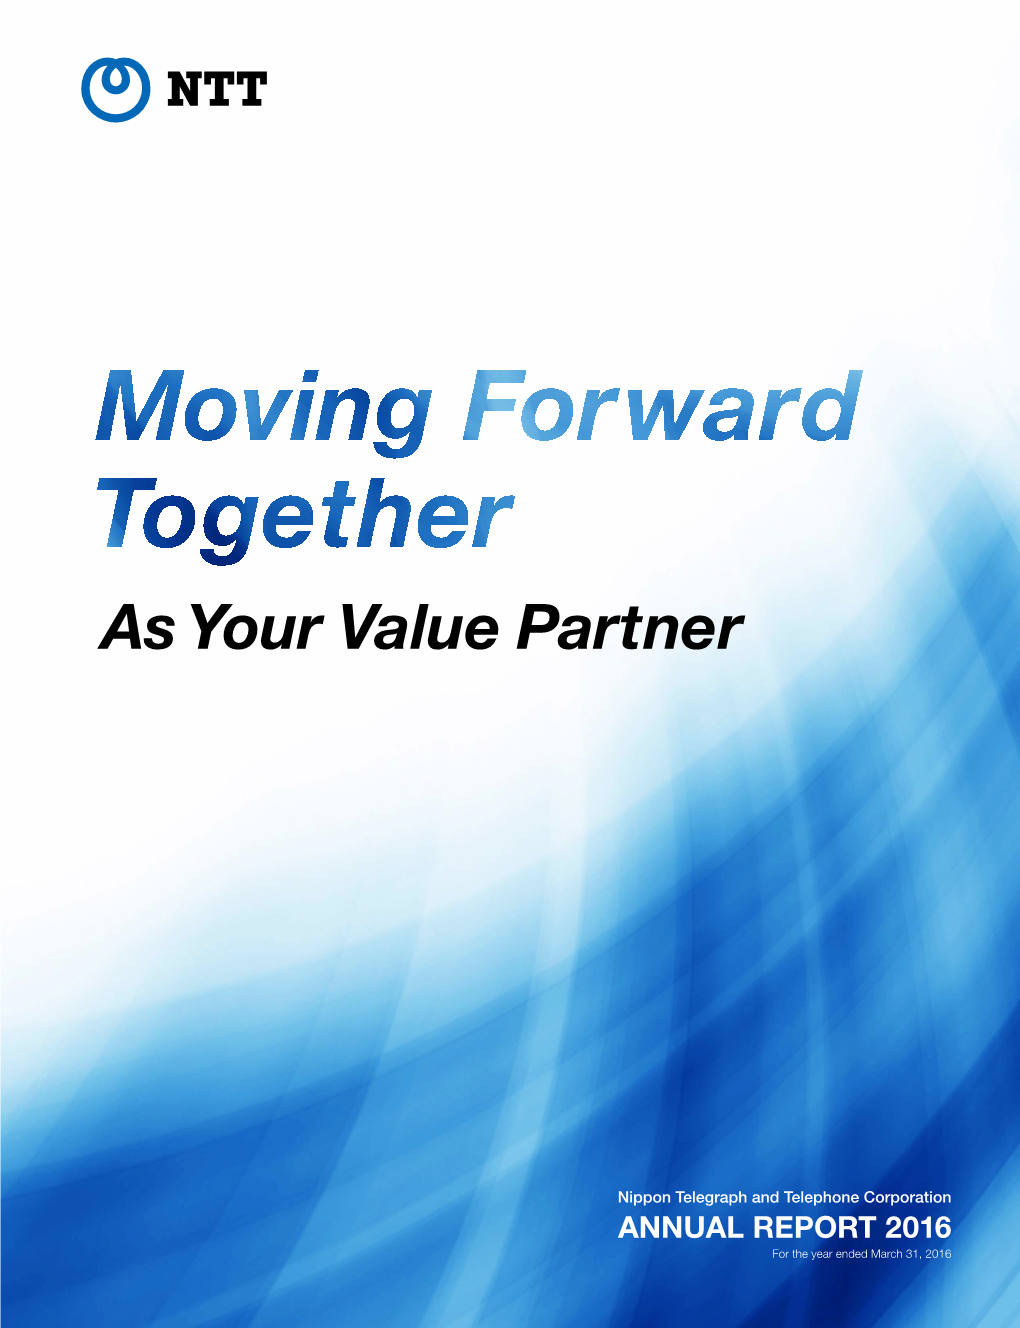 As Your Value Partner